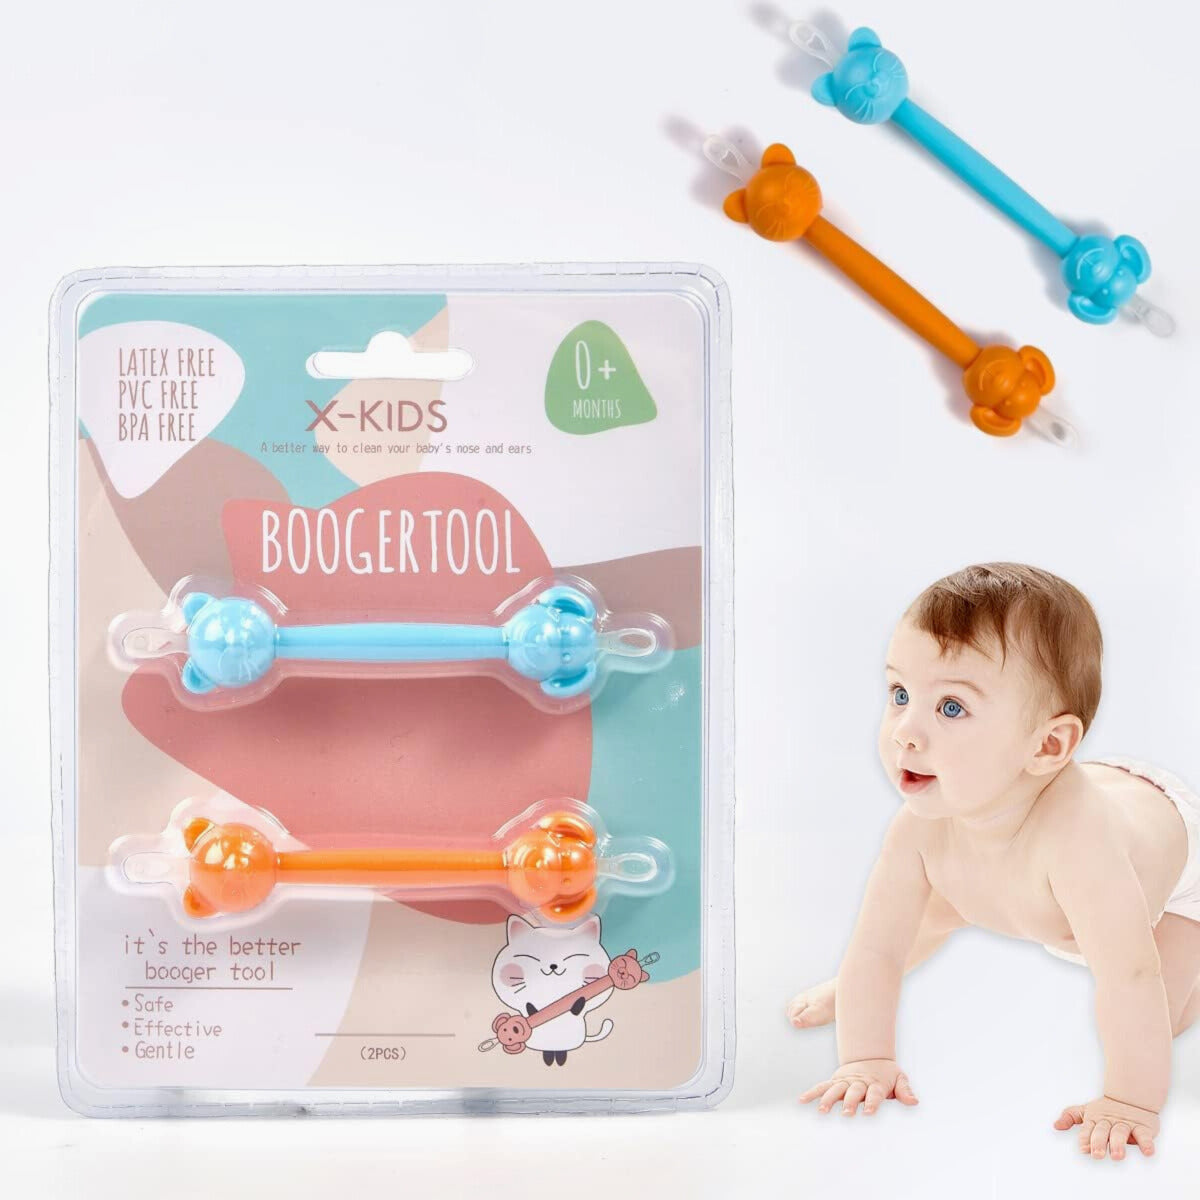 This tool is the best way to safely pick your baby's nose, ears